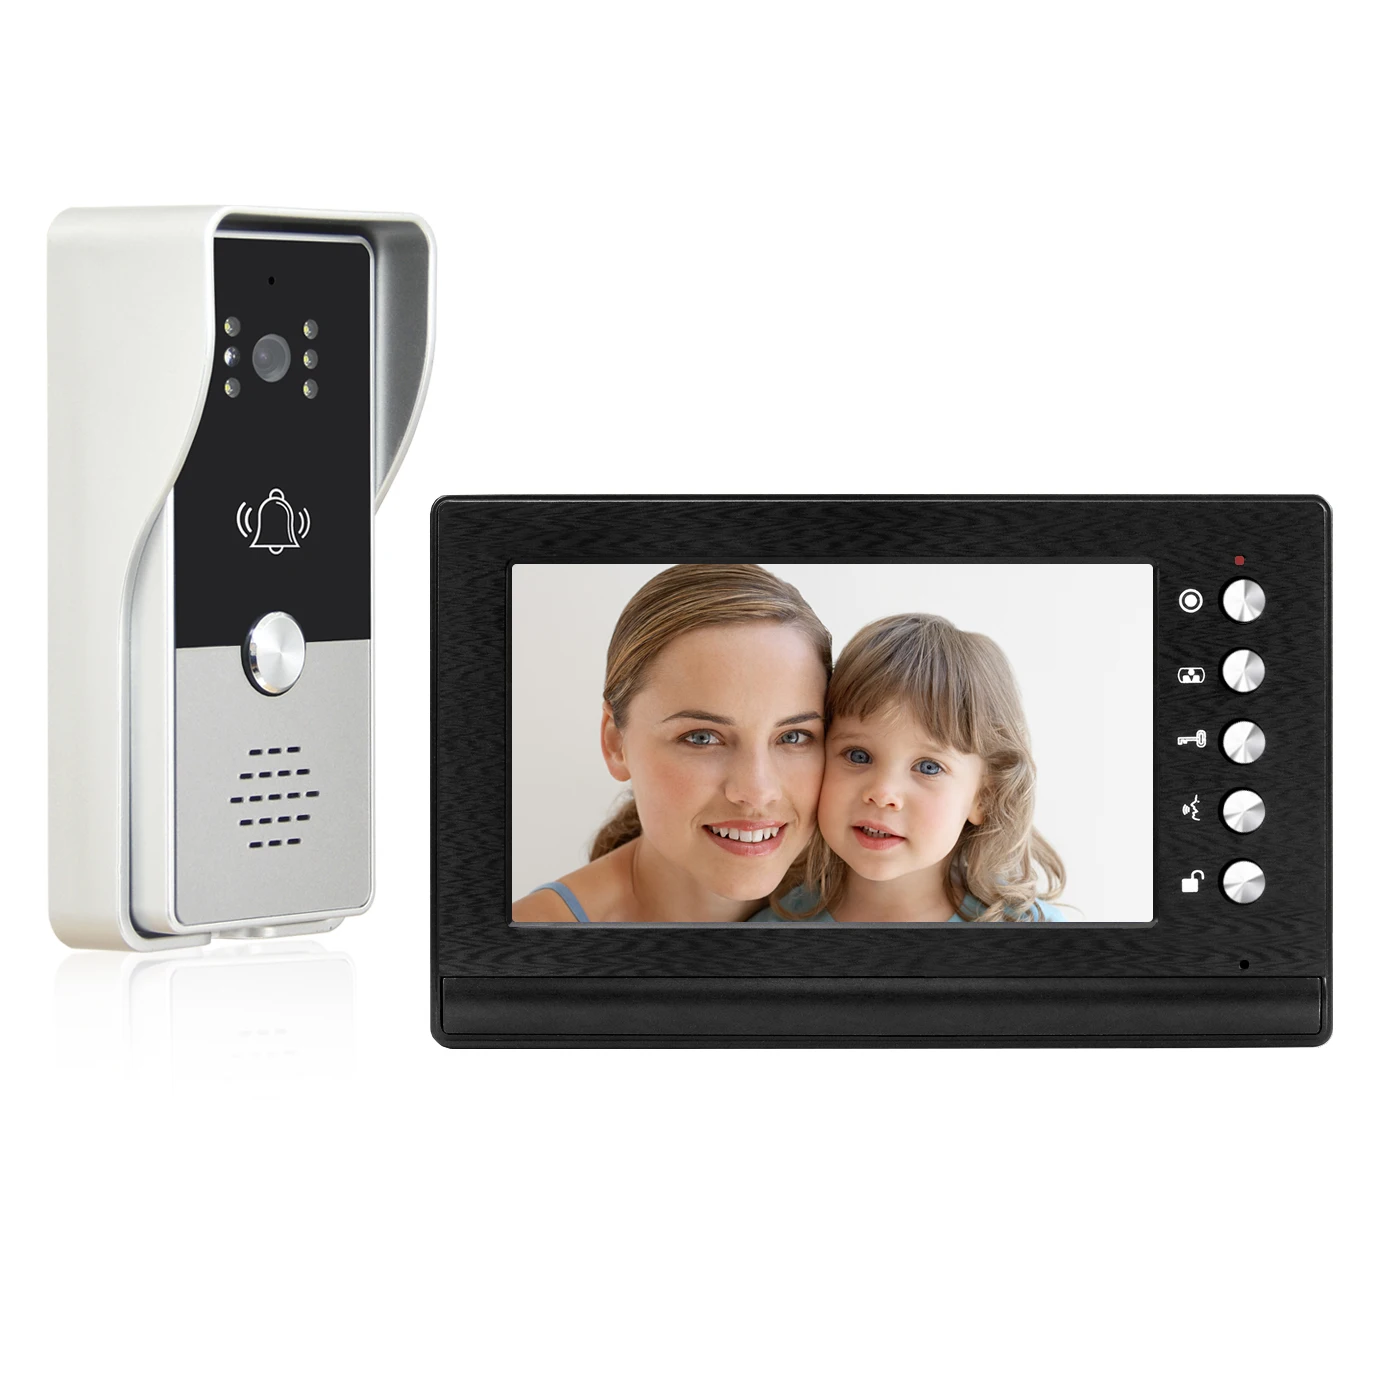 Wired Video Intercom System Video Entry Door phone Doorbell 7 inch LCD Monitor + IR Camera Kits for Home Housers Villa Apartment